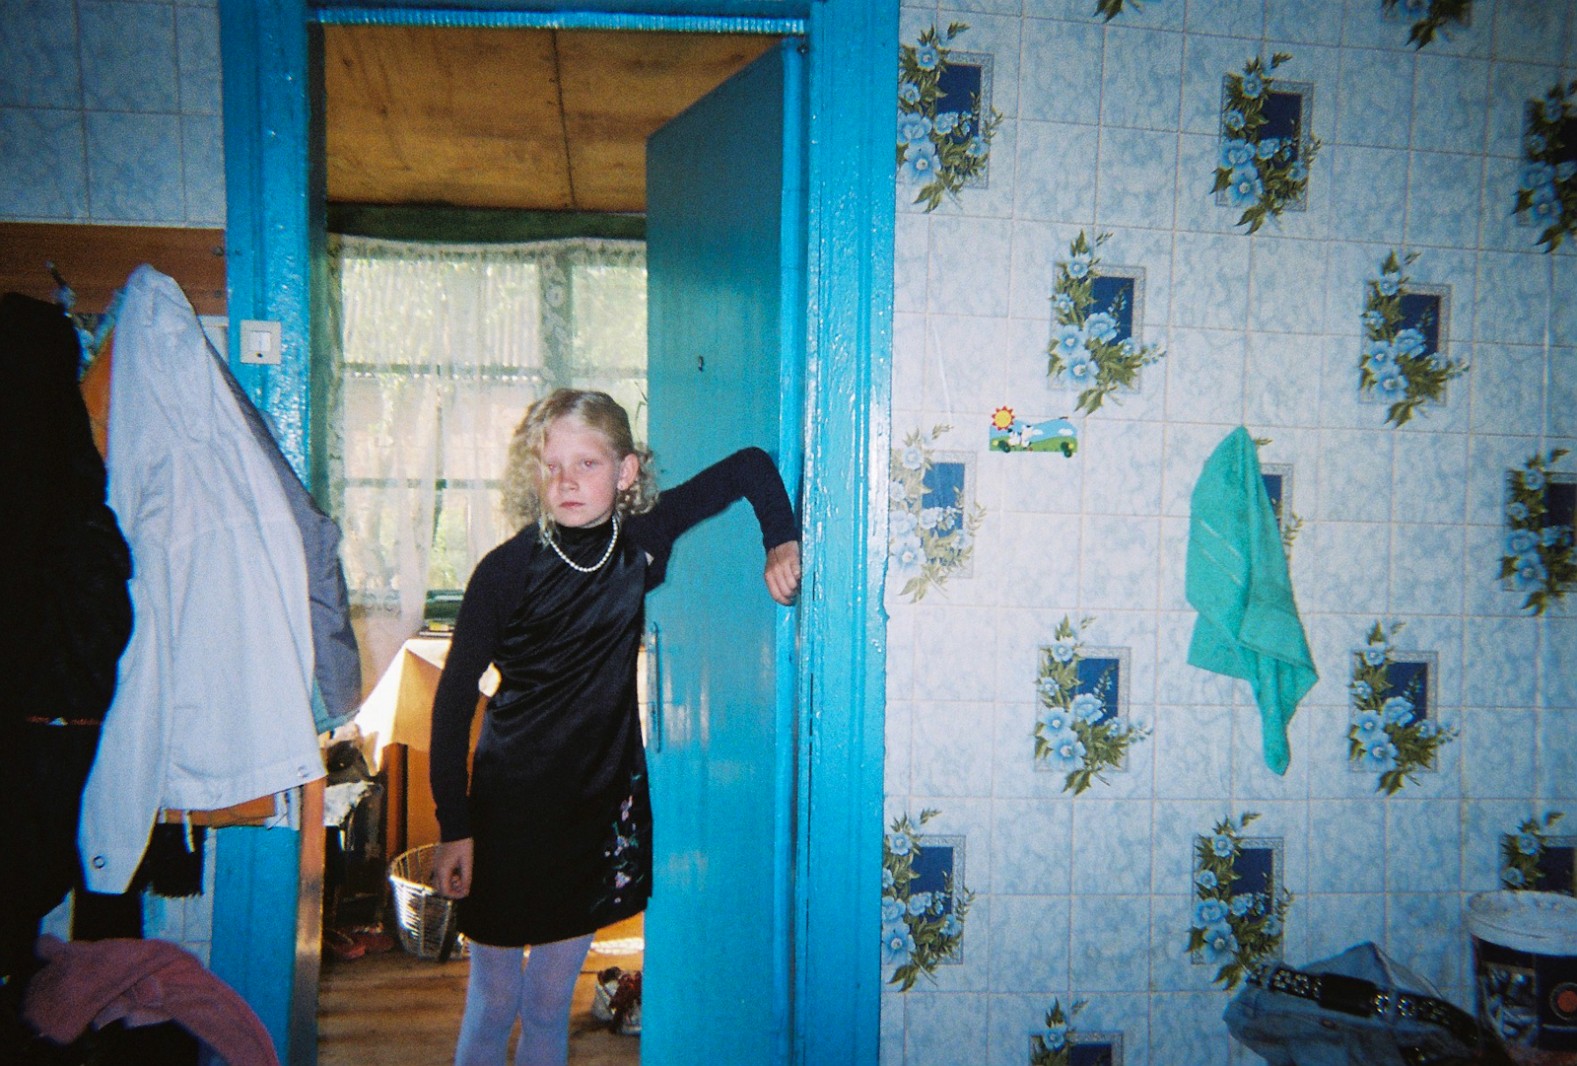 A young girl poses for the camera in her house adjacent to the Chernobyl Exclusion Zone